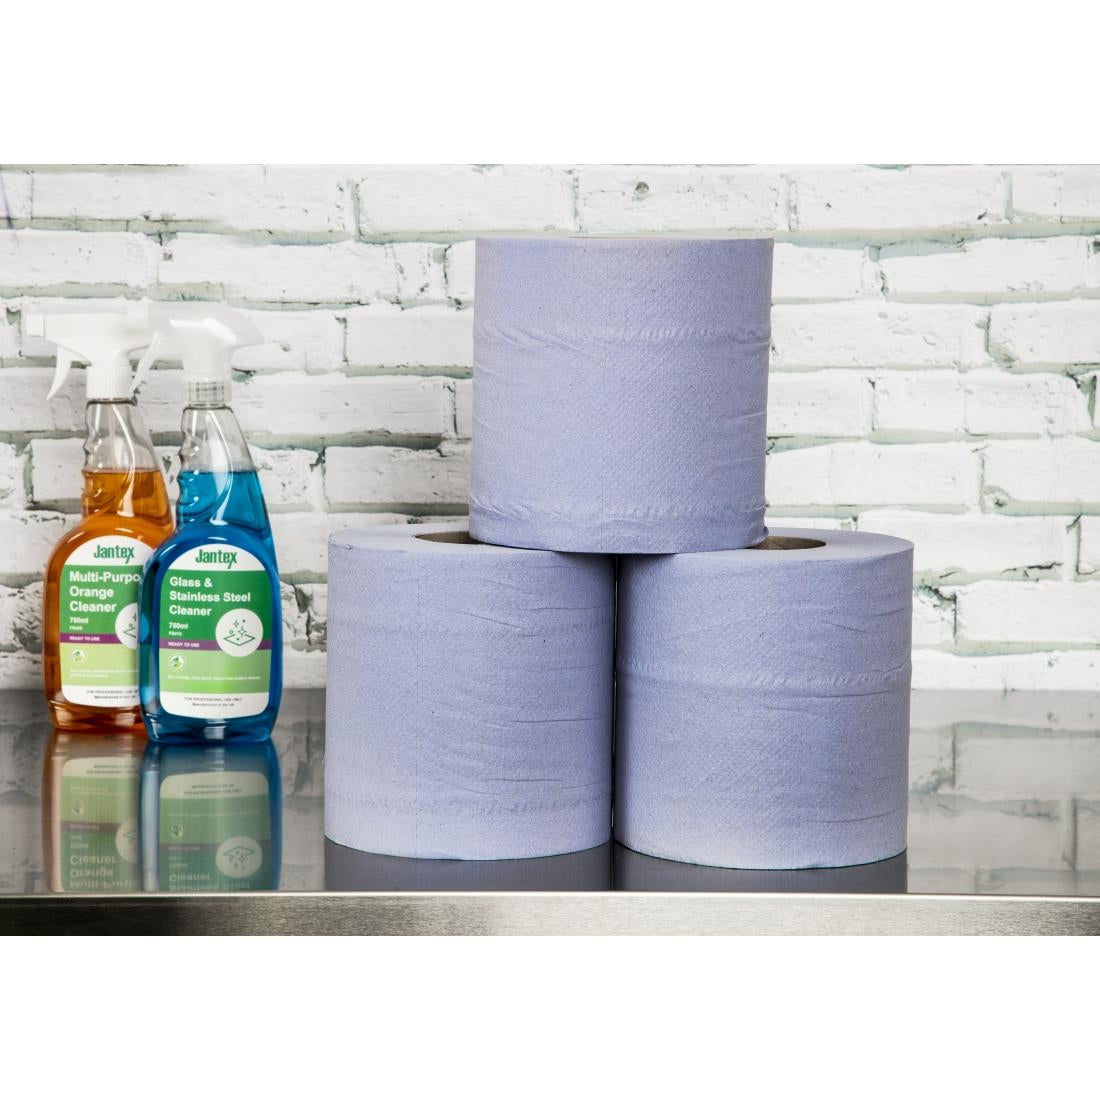 Jantex Centrefeed Blue Rolls 2-Ply 120m (Pack of 6) 2-Ply. Roll Length: 120m. Pack Quantity: 6. Sheet Width: 175mm JD Catering Equipment Solutions Ltd